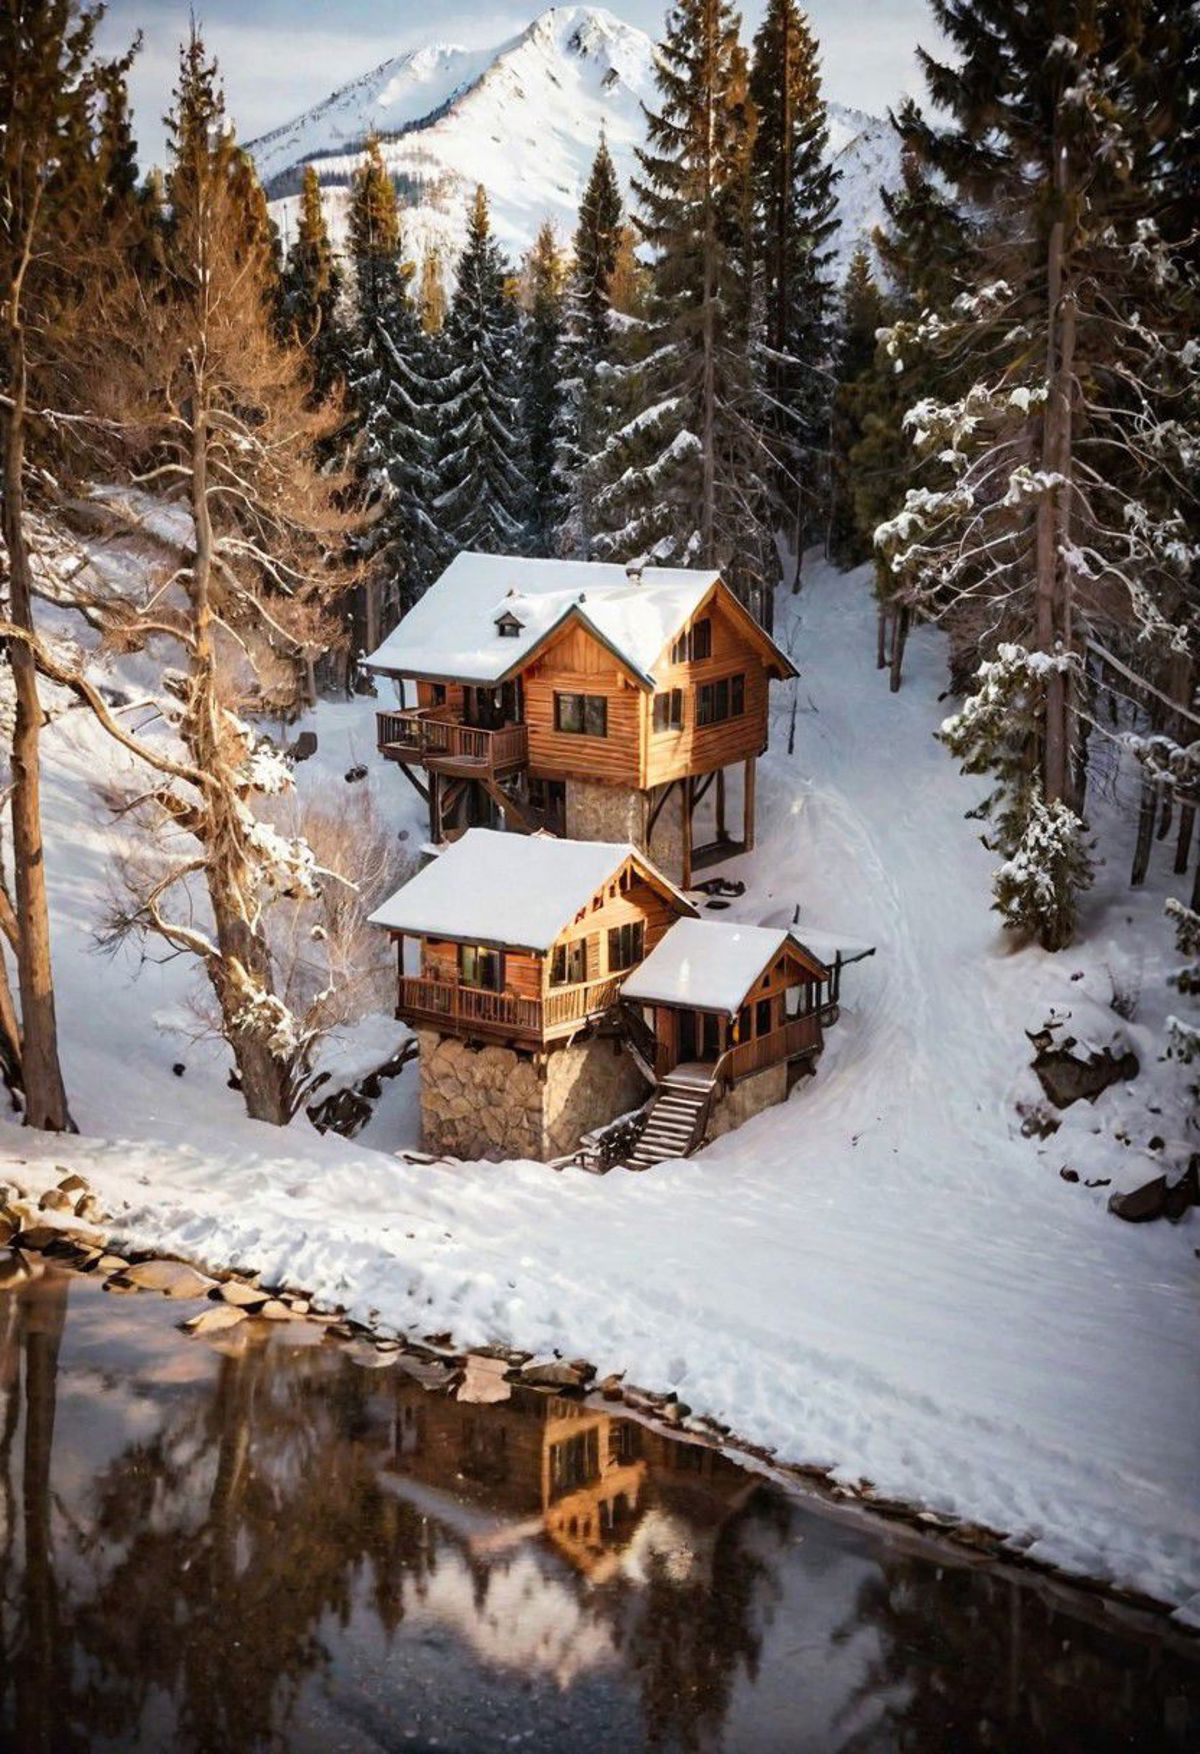 A picturesque scene of two snow-covered cabins by a lake.